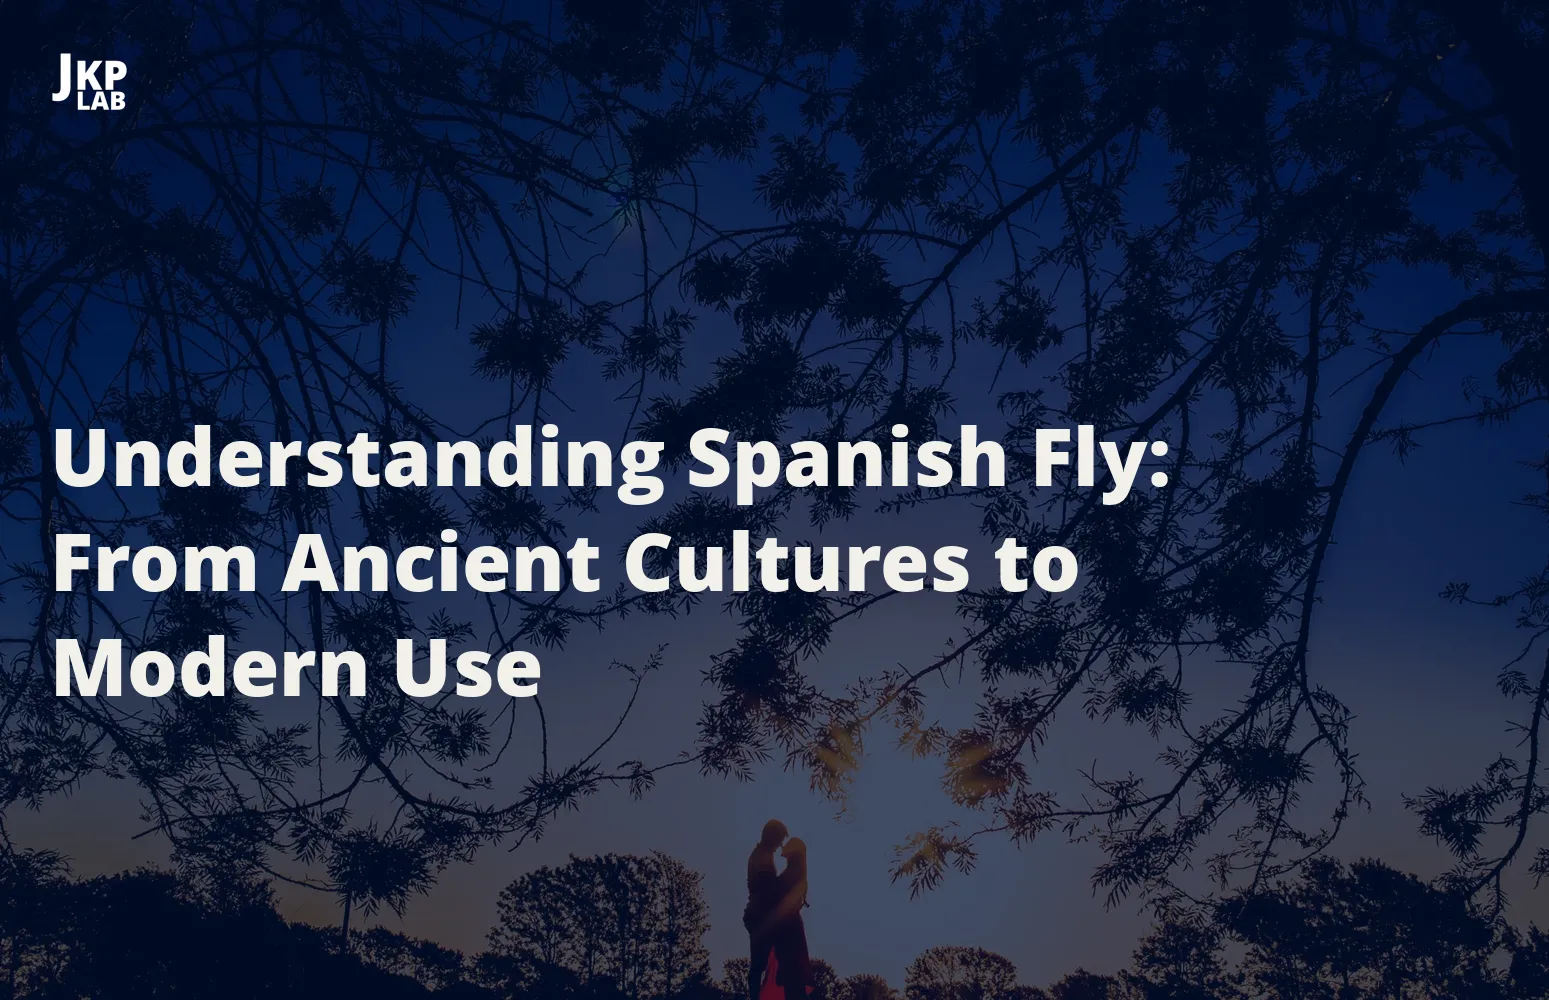 All you need to know about Spanish Fly Products